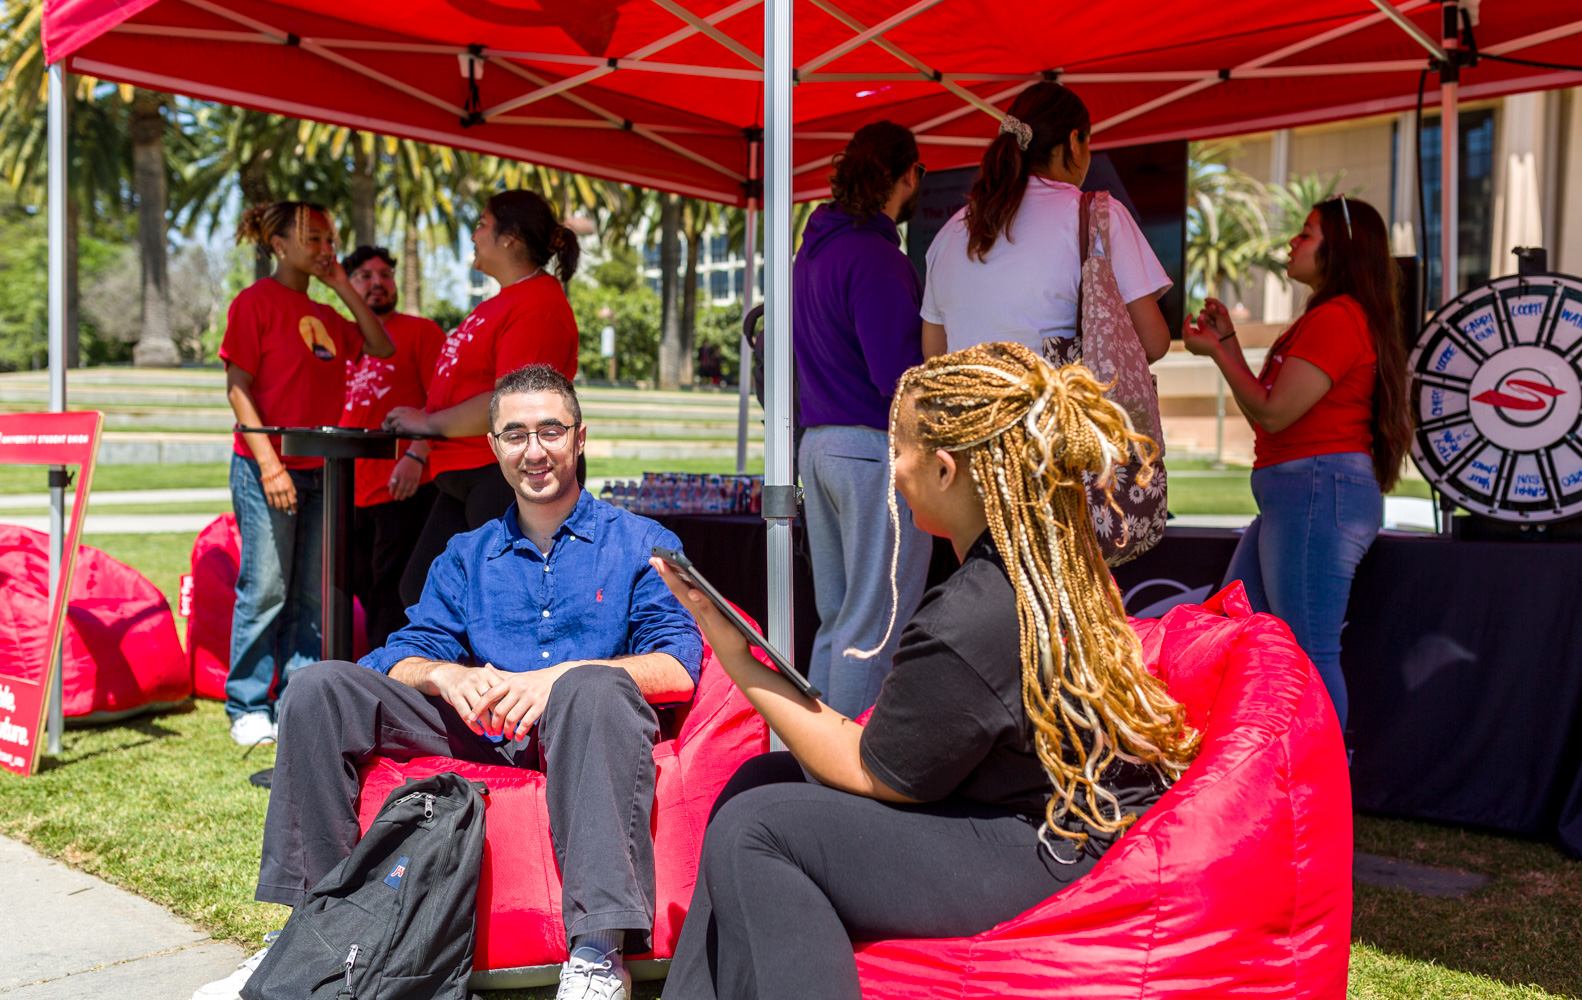 USU Heart of Campus Project Champion Jordan Brown interacts with a CSUN student.